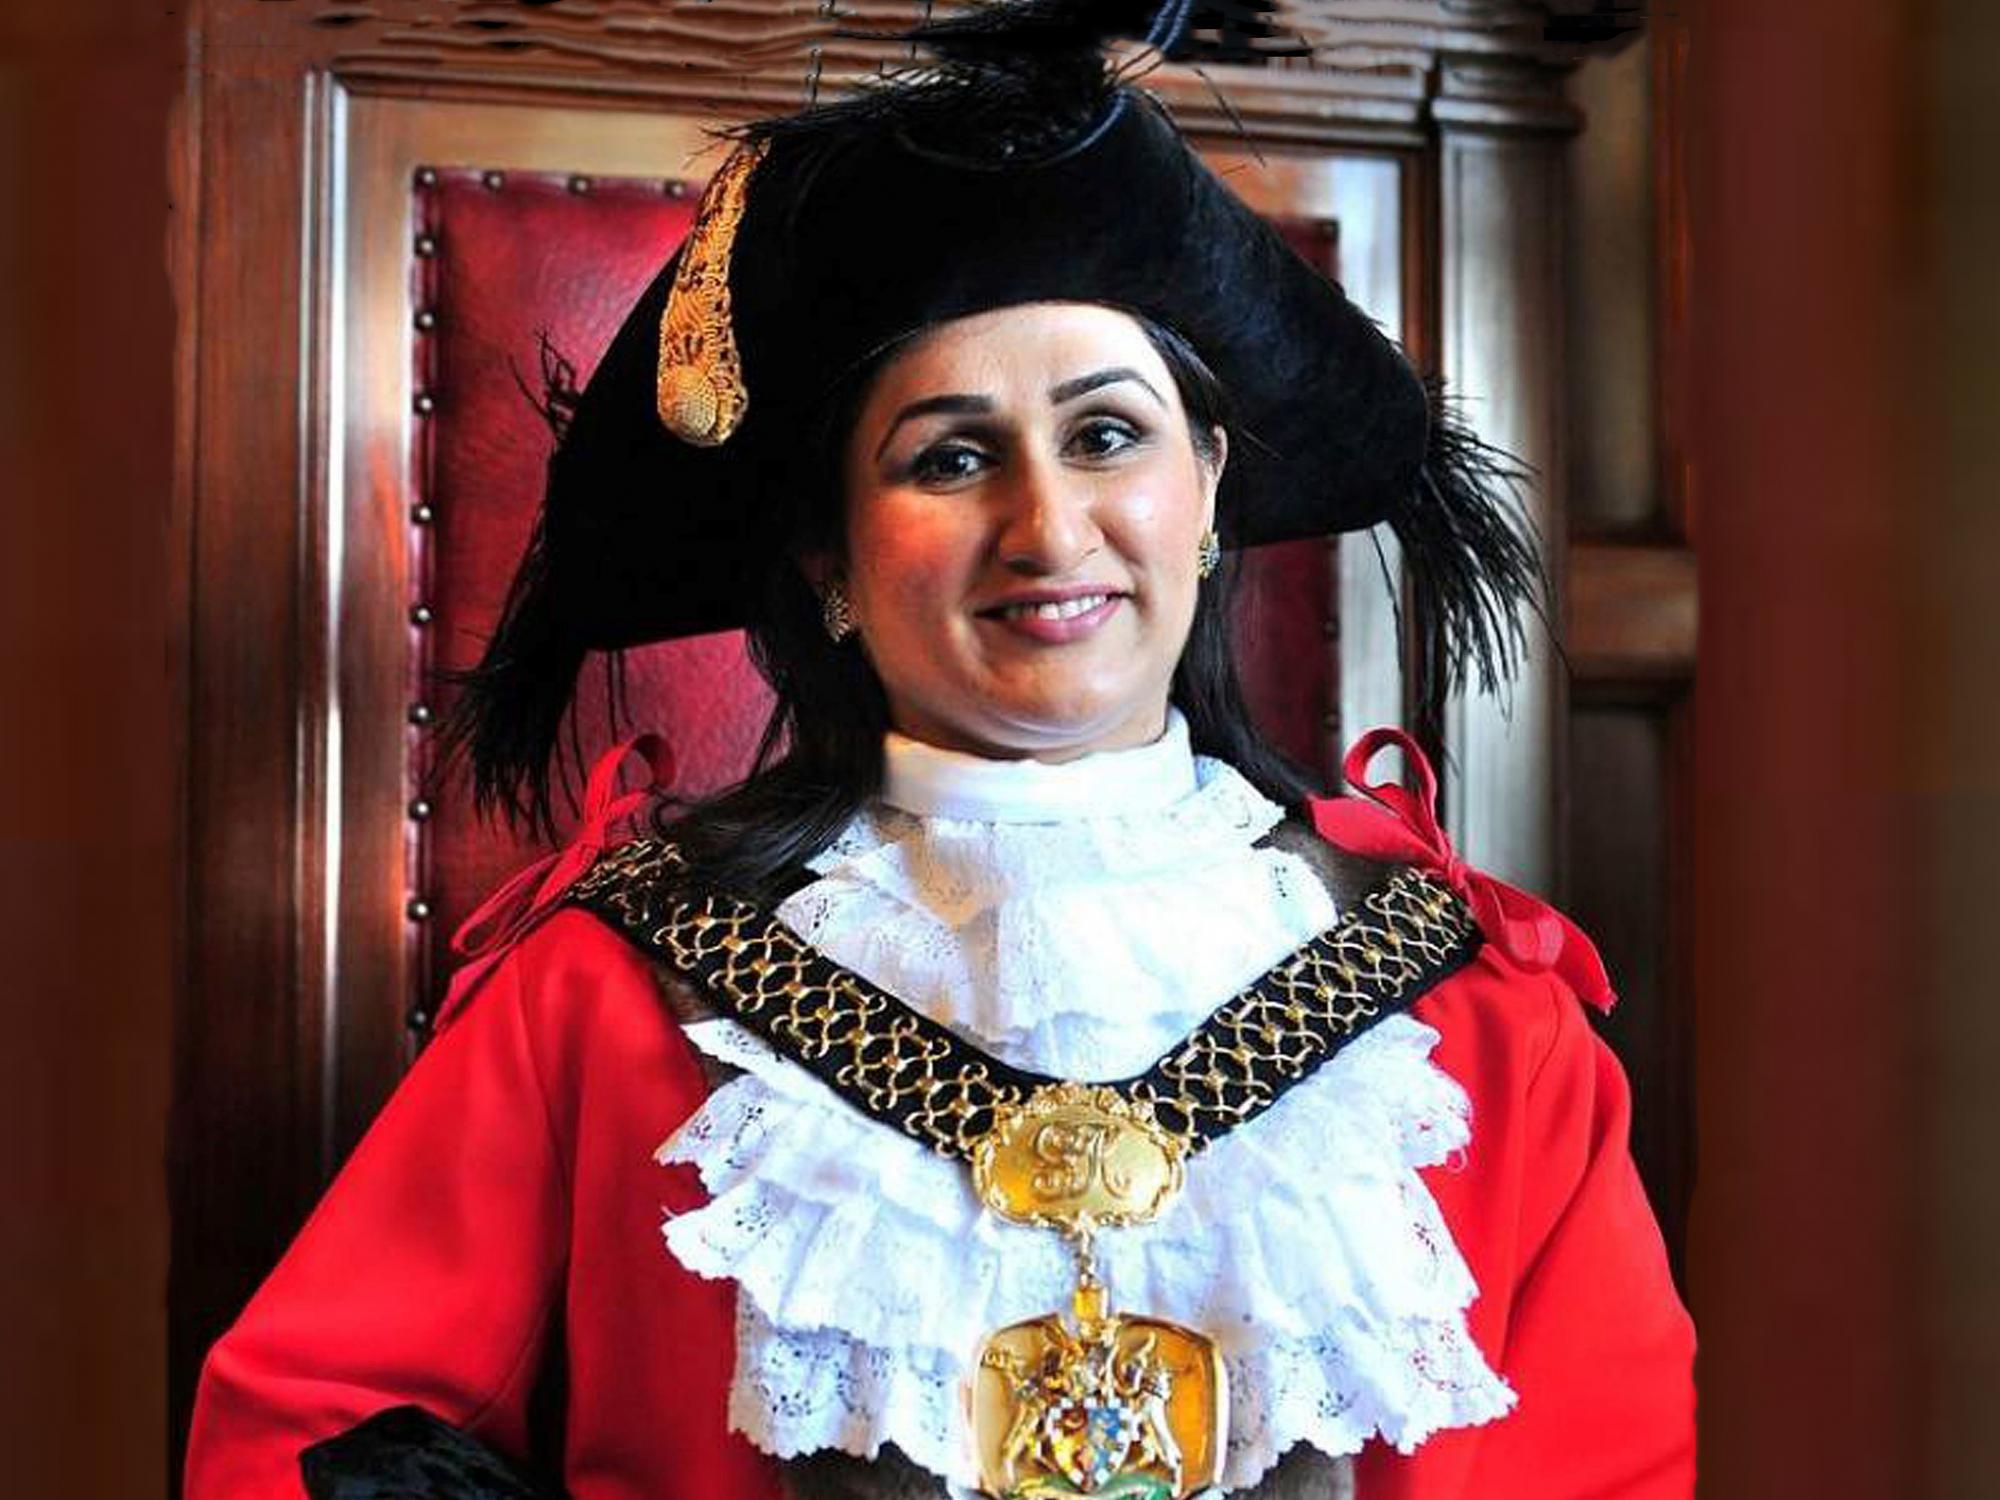 Naveeda Ikram, a Pakistani-born Briton, is the United Kingdom’s first lord mayor to be both Muslim and a woman